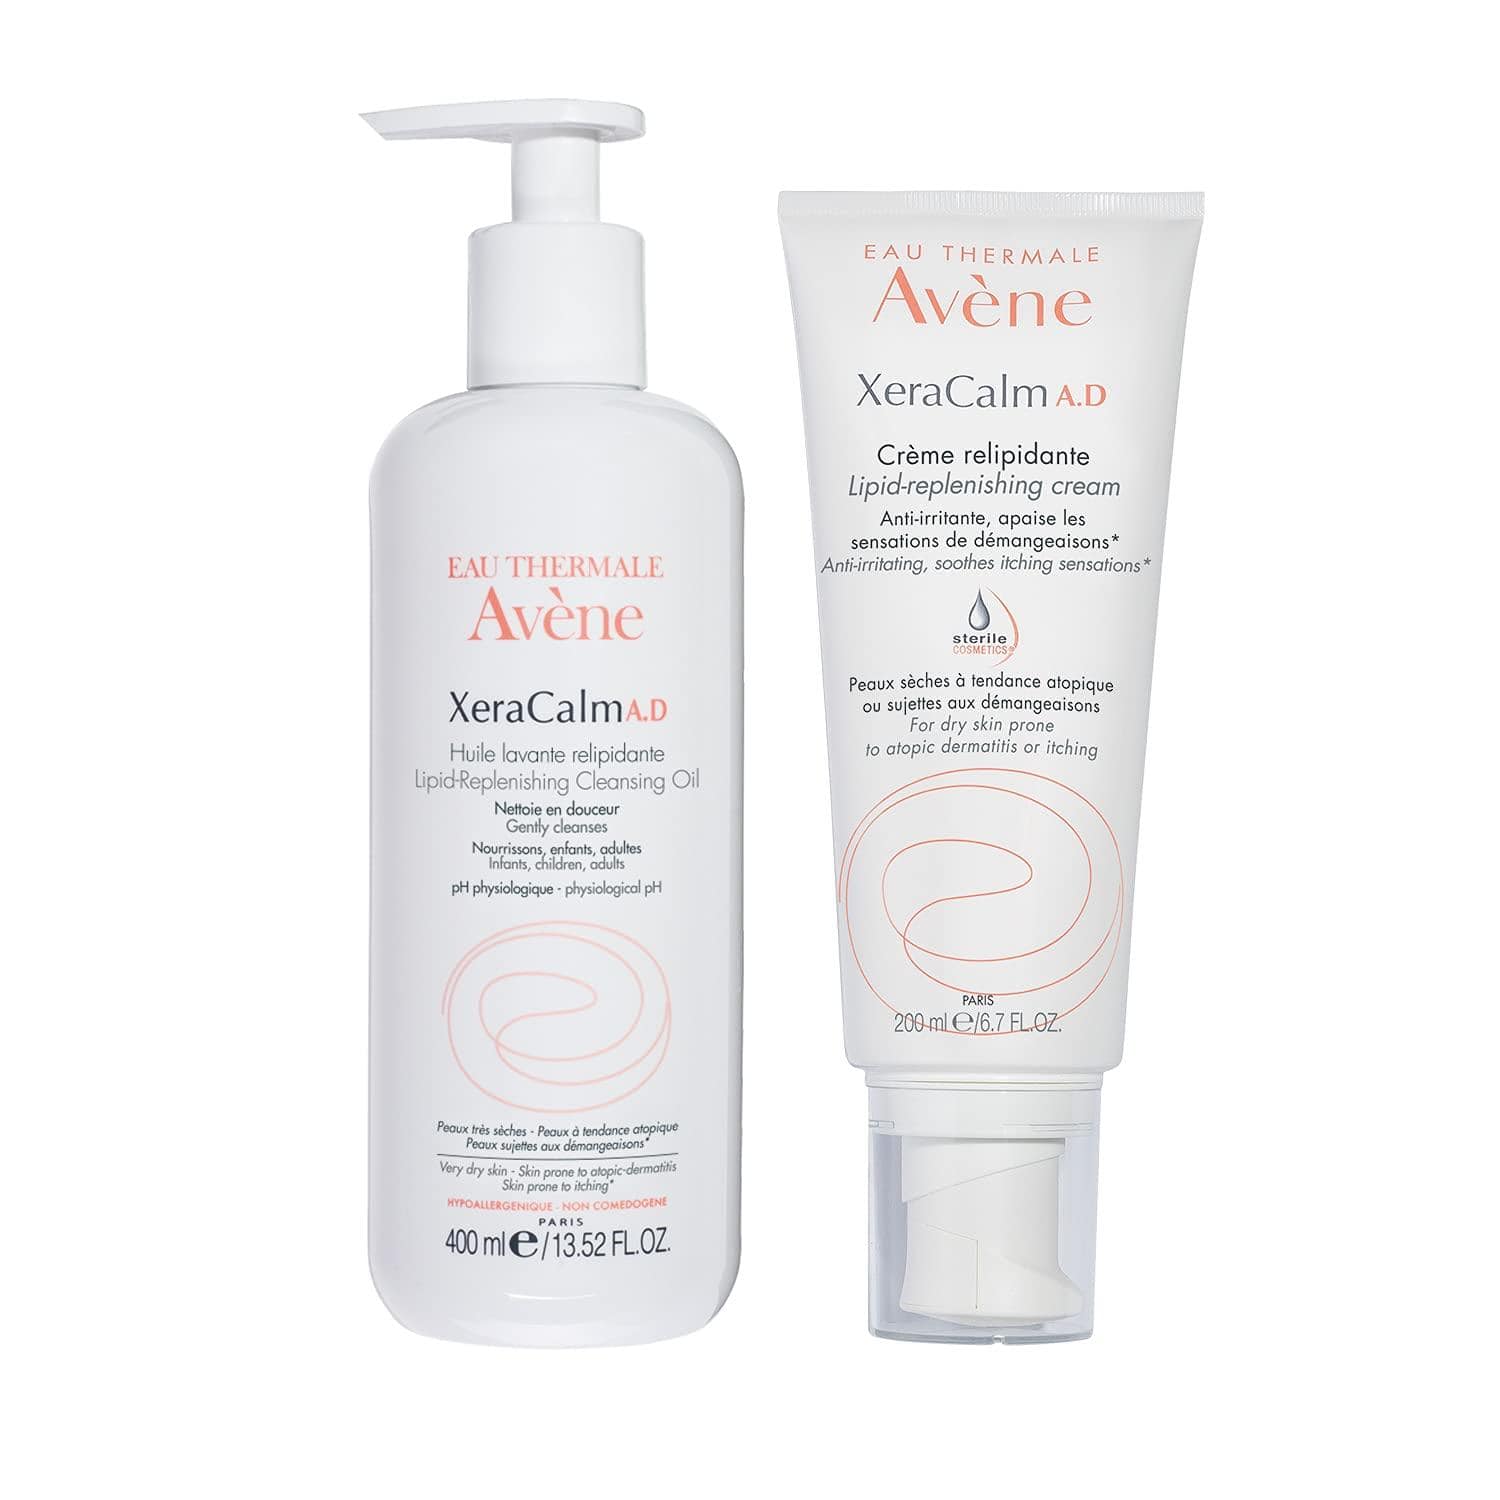 Combatting extreme dryness is a breeze with Avène's XeraCalm Lipid-Replenishing Cream – my go-to for its rich blend of ceramides and vitamin E, earning high praise from four dermatologists in the realm of Body Lotions.